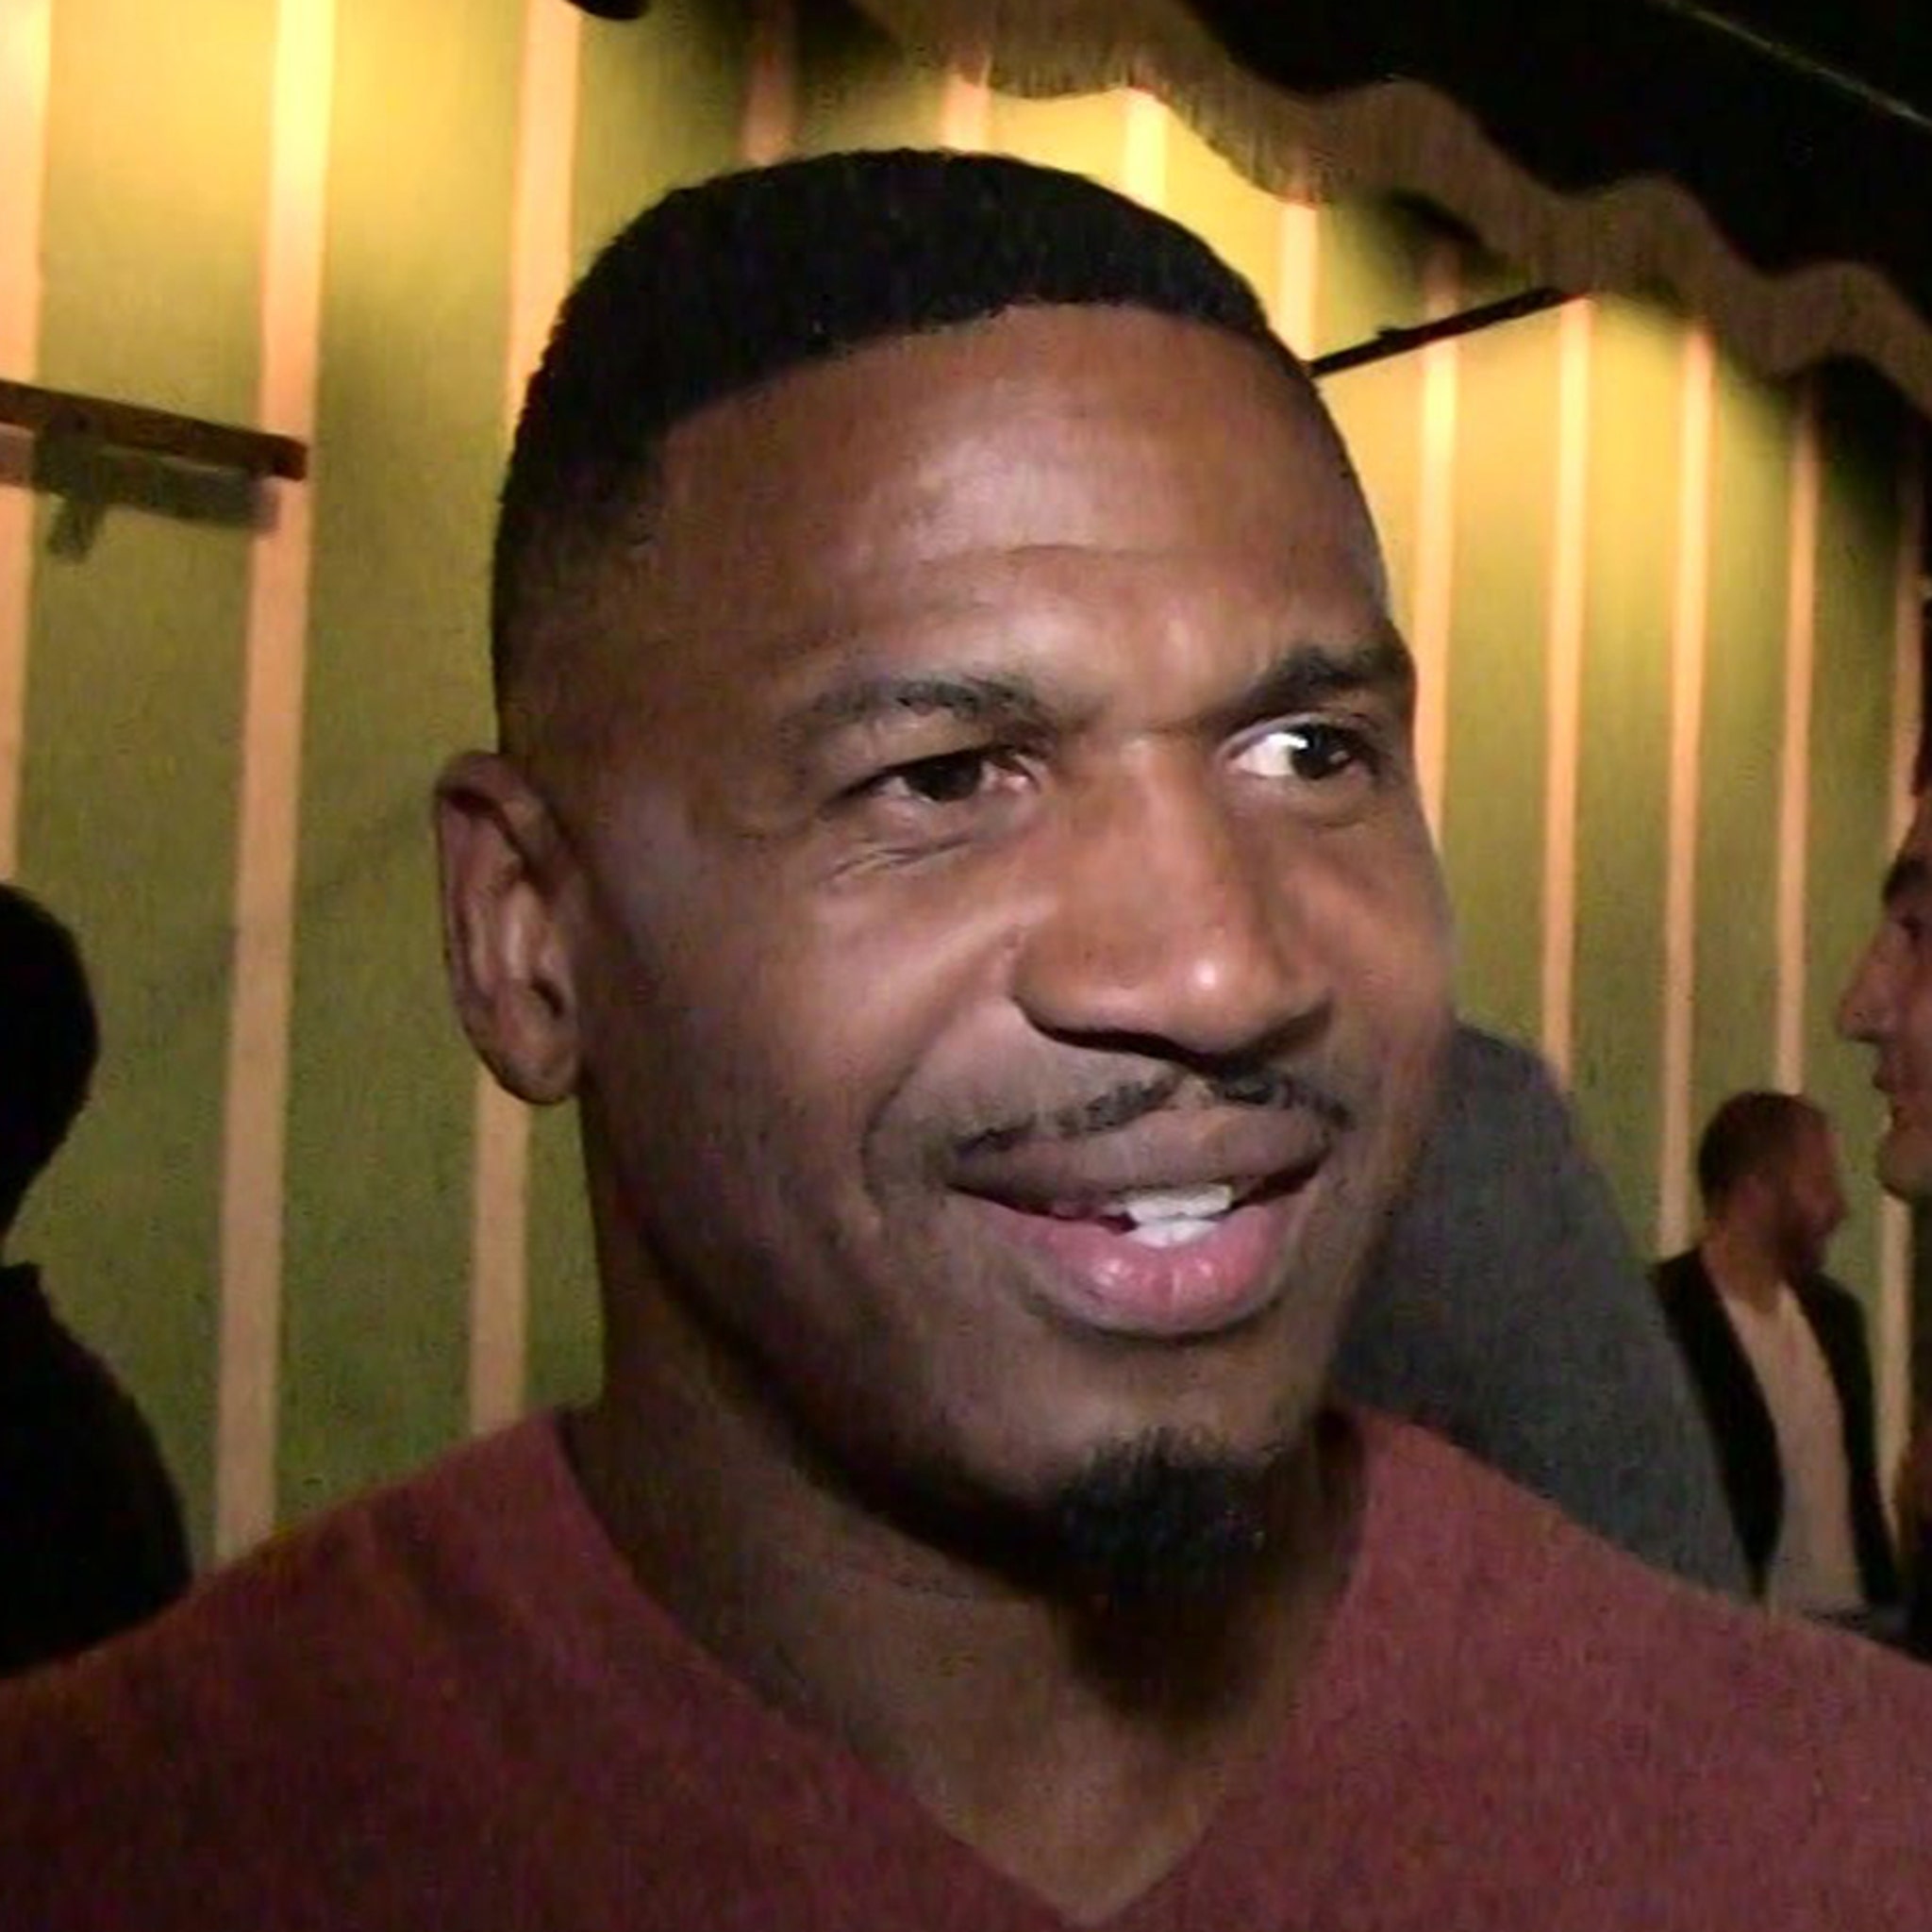 Stevie J Appears to Be Receiving Oral Sex During FaceTime Interview photo pic